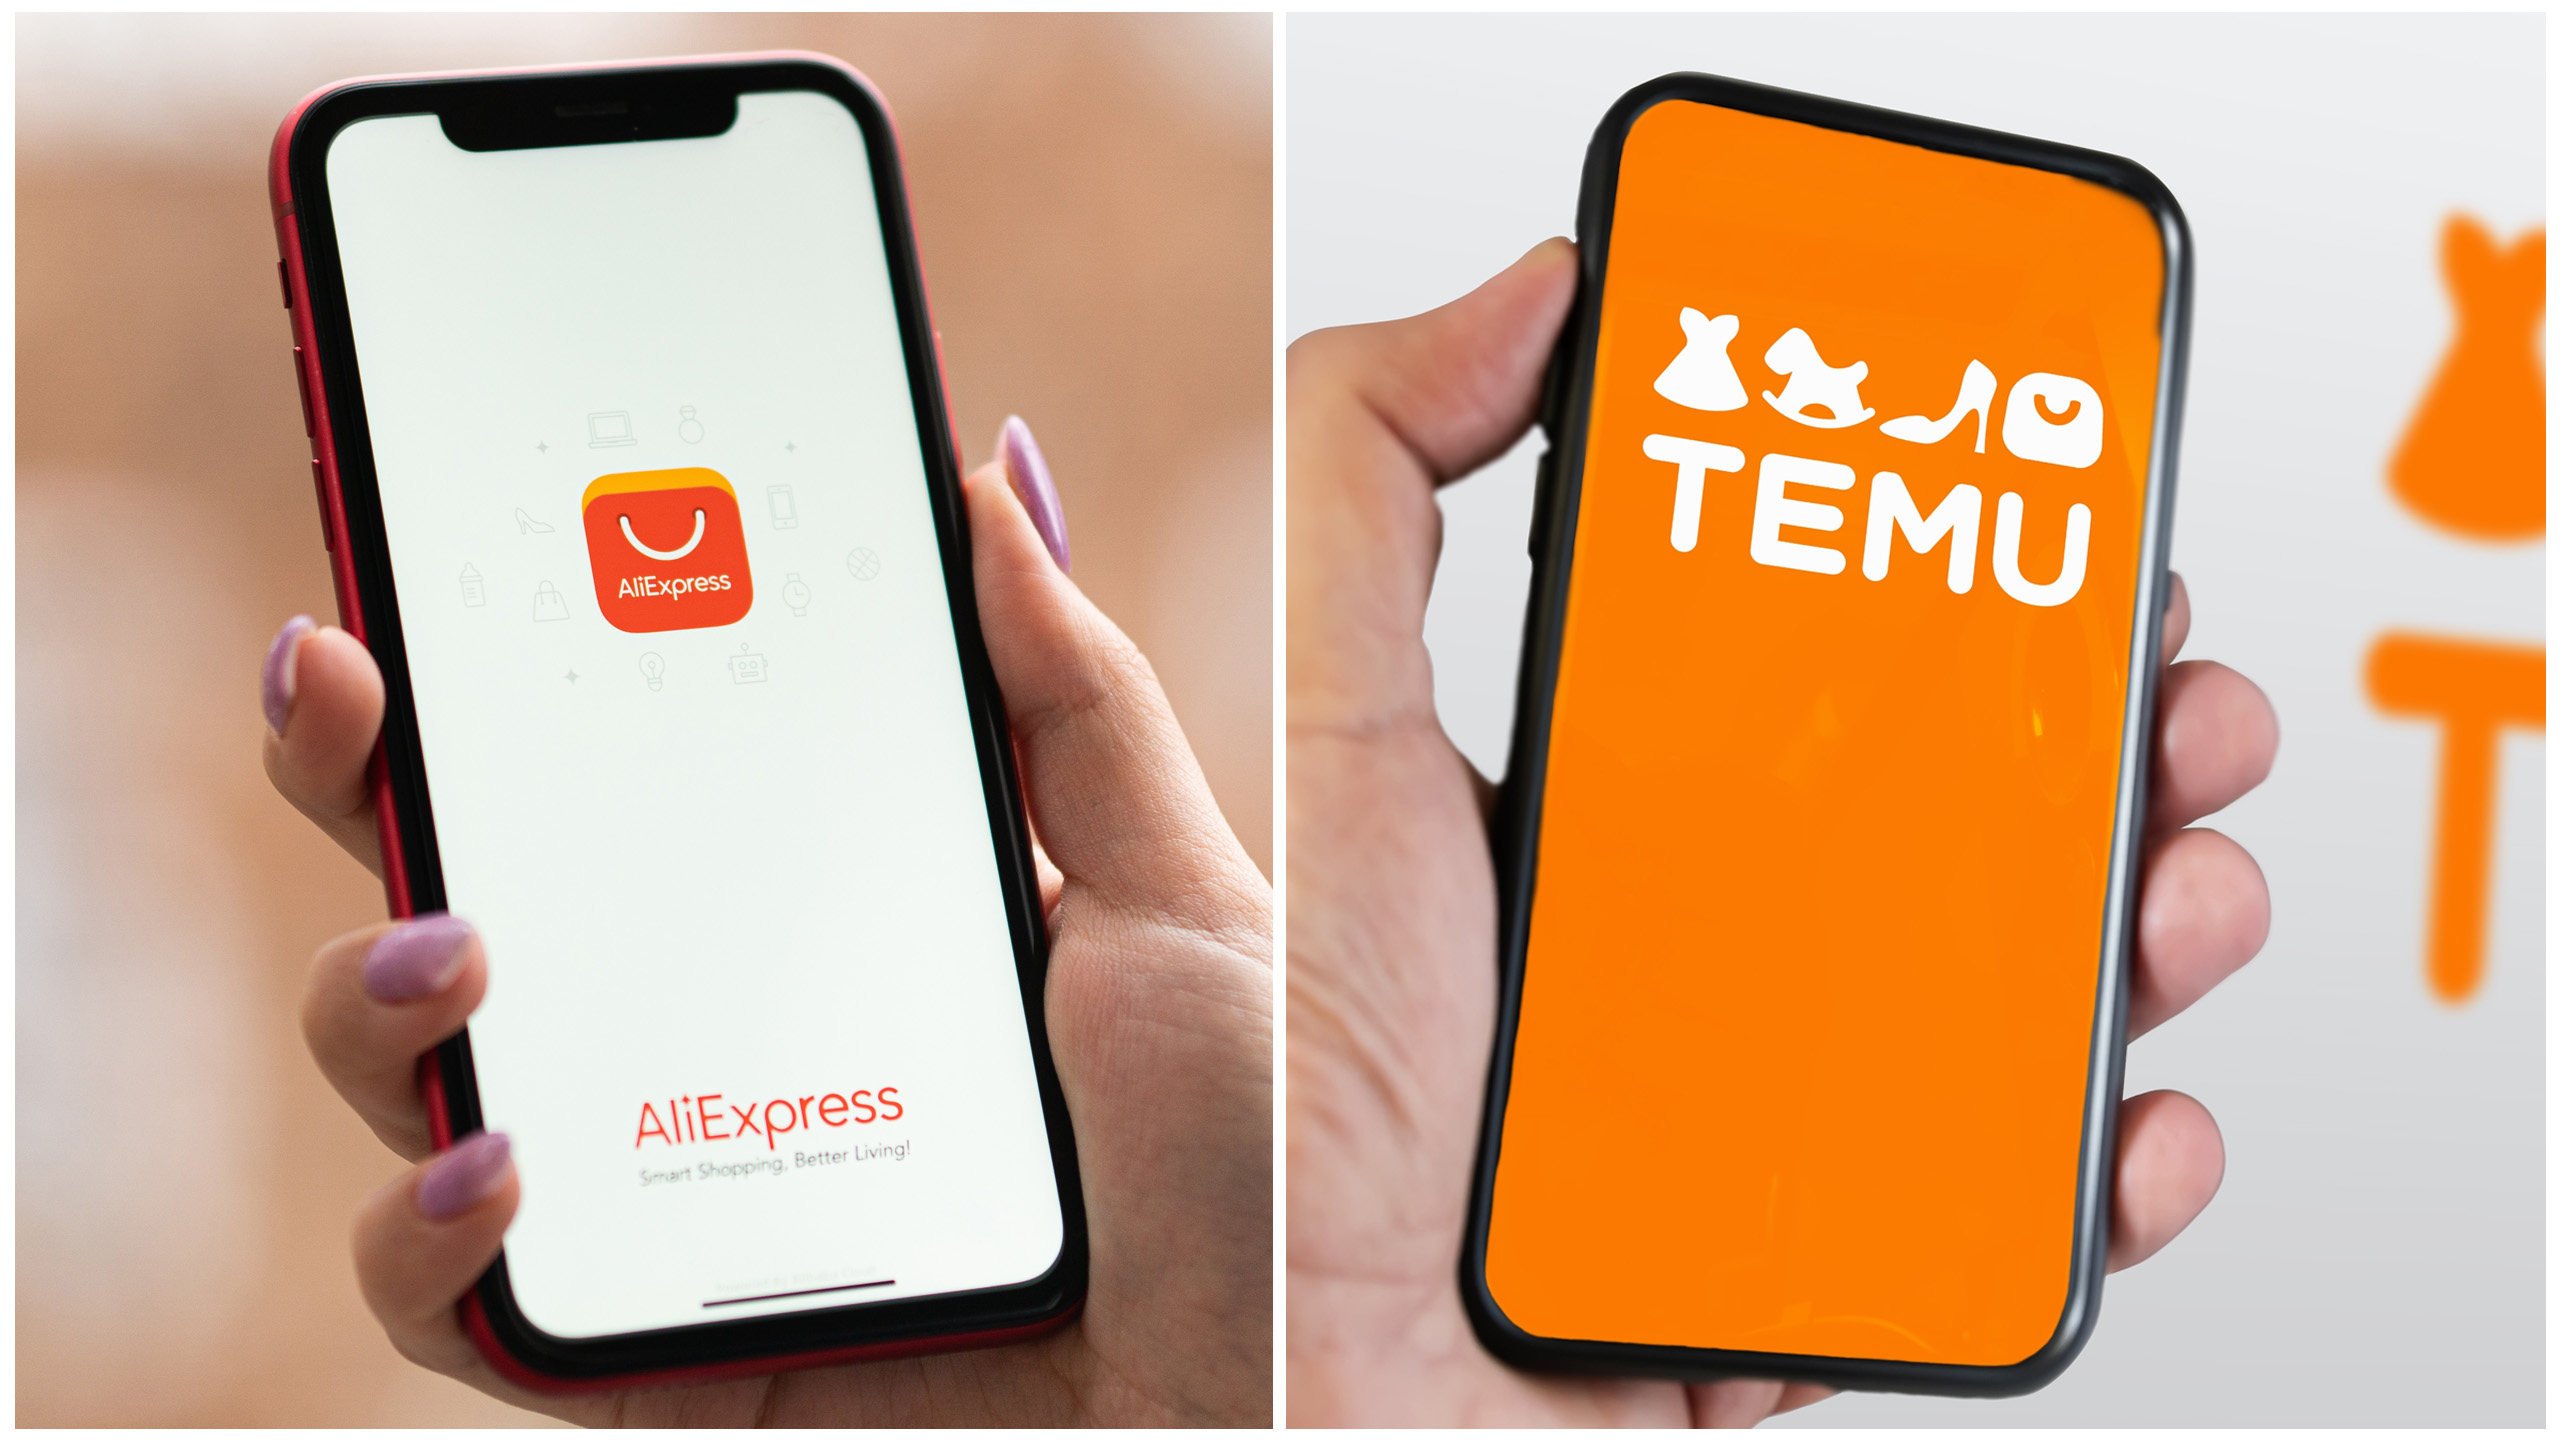 Alibaba’s AliExpress, PDD-owned Temu face supply chain challenges in South Korea – South China Morning Post